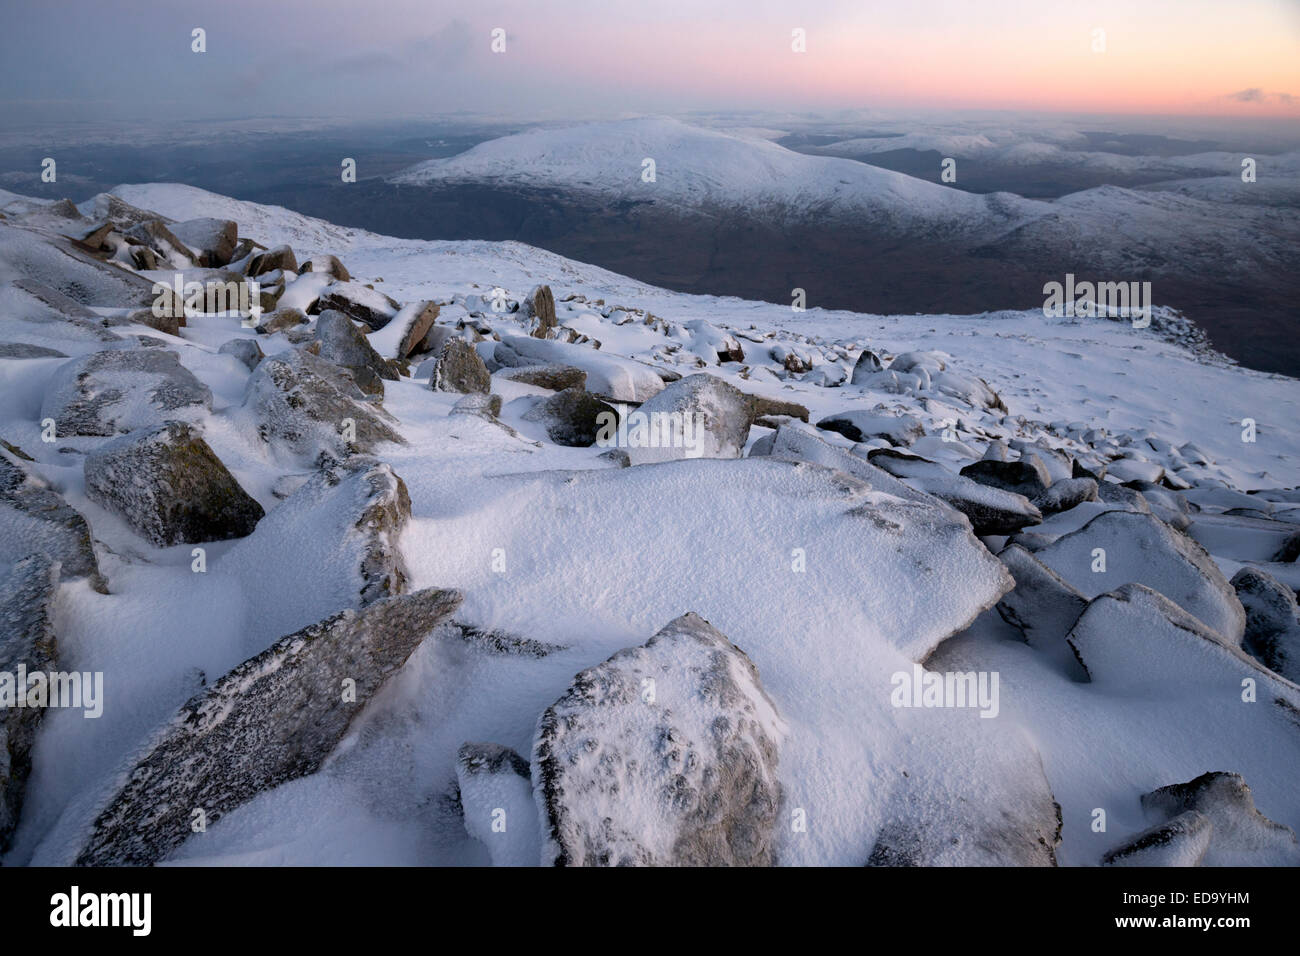 Winter view of Moel Siabod from Glyder Fach at dusk, Snowdonia National Park, Wales, UK Stock Photo